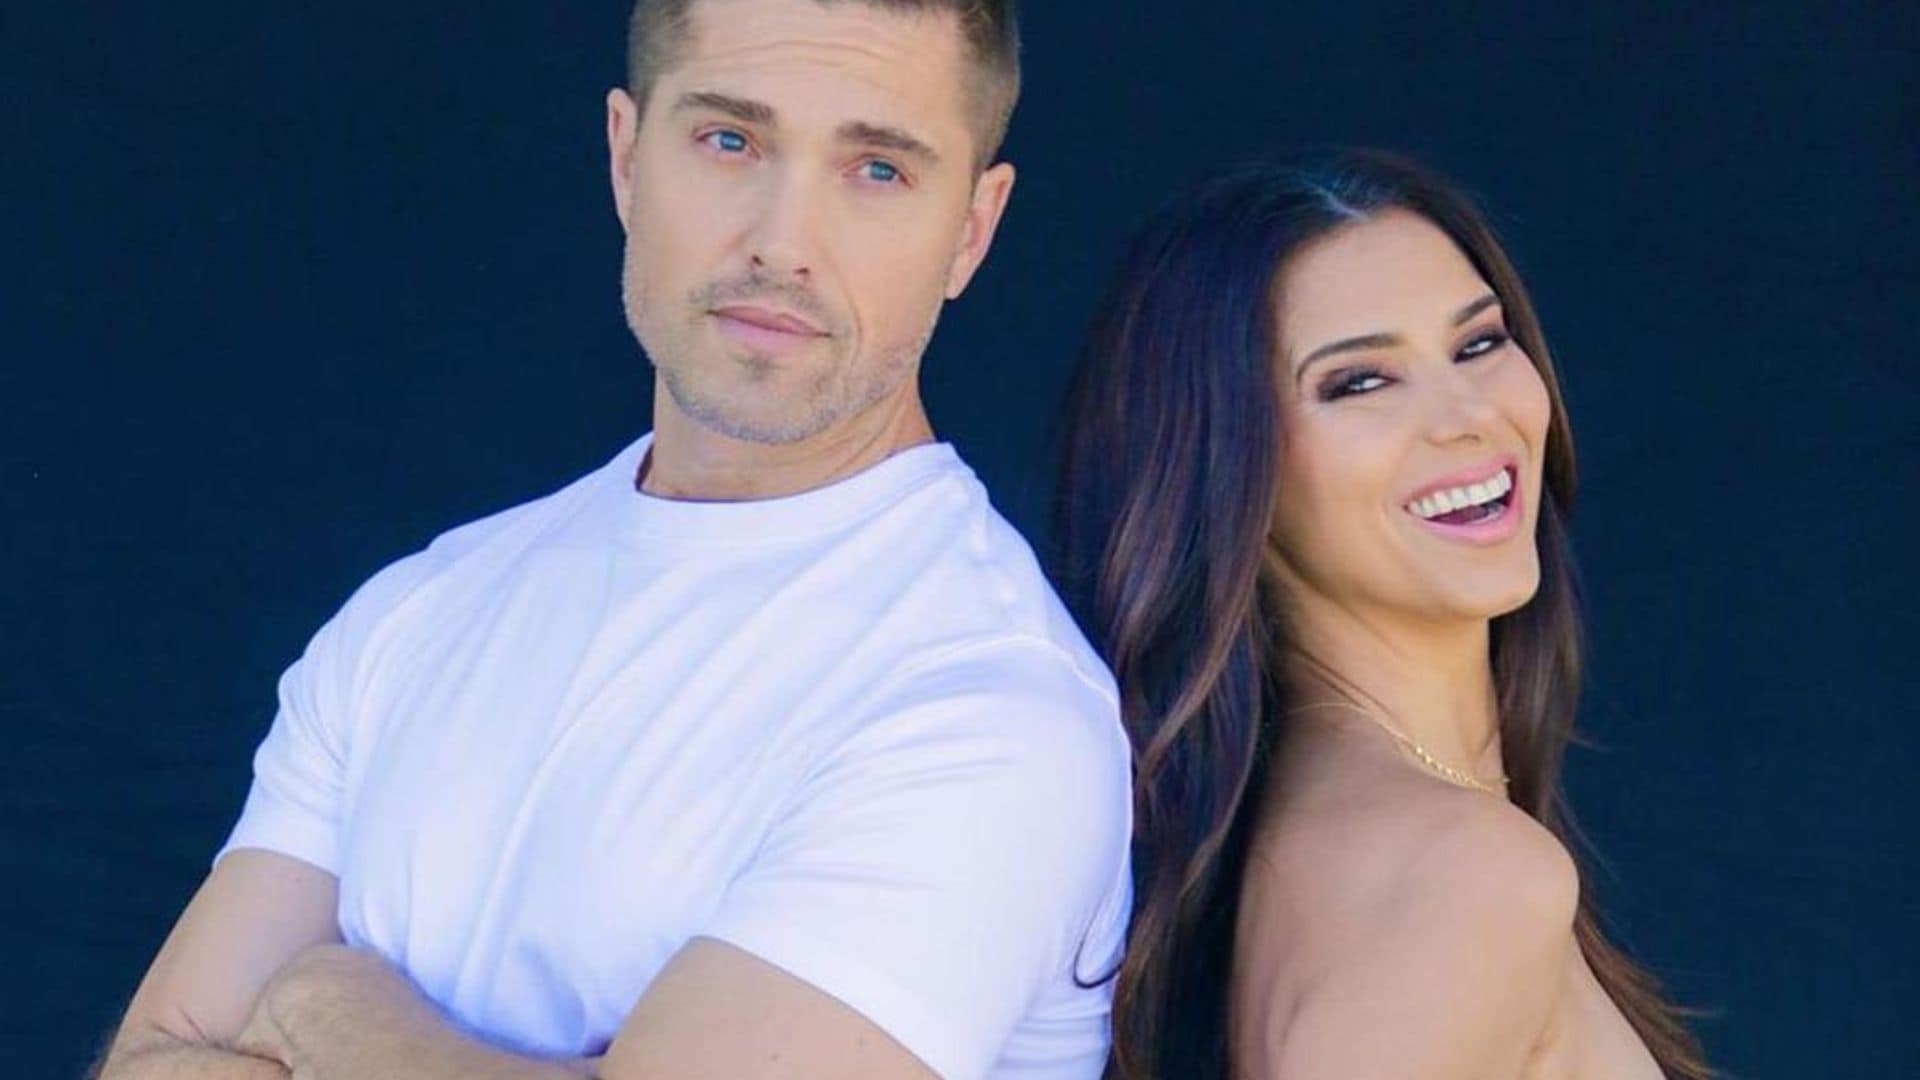 Roselyn Sanchez talks to HOLA! USA about her IVF experience: ‘I hope it brings hope’